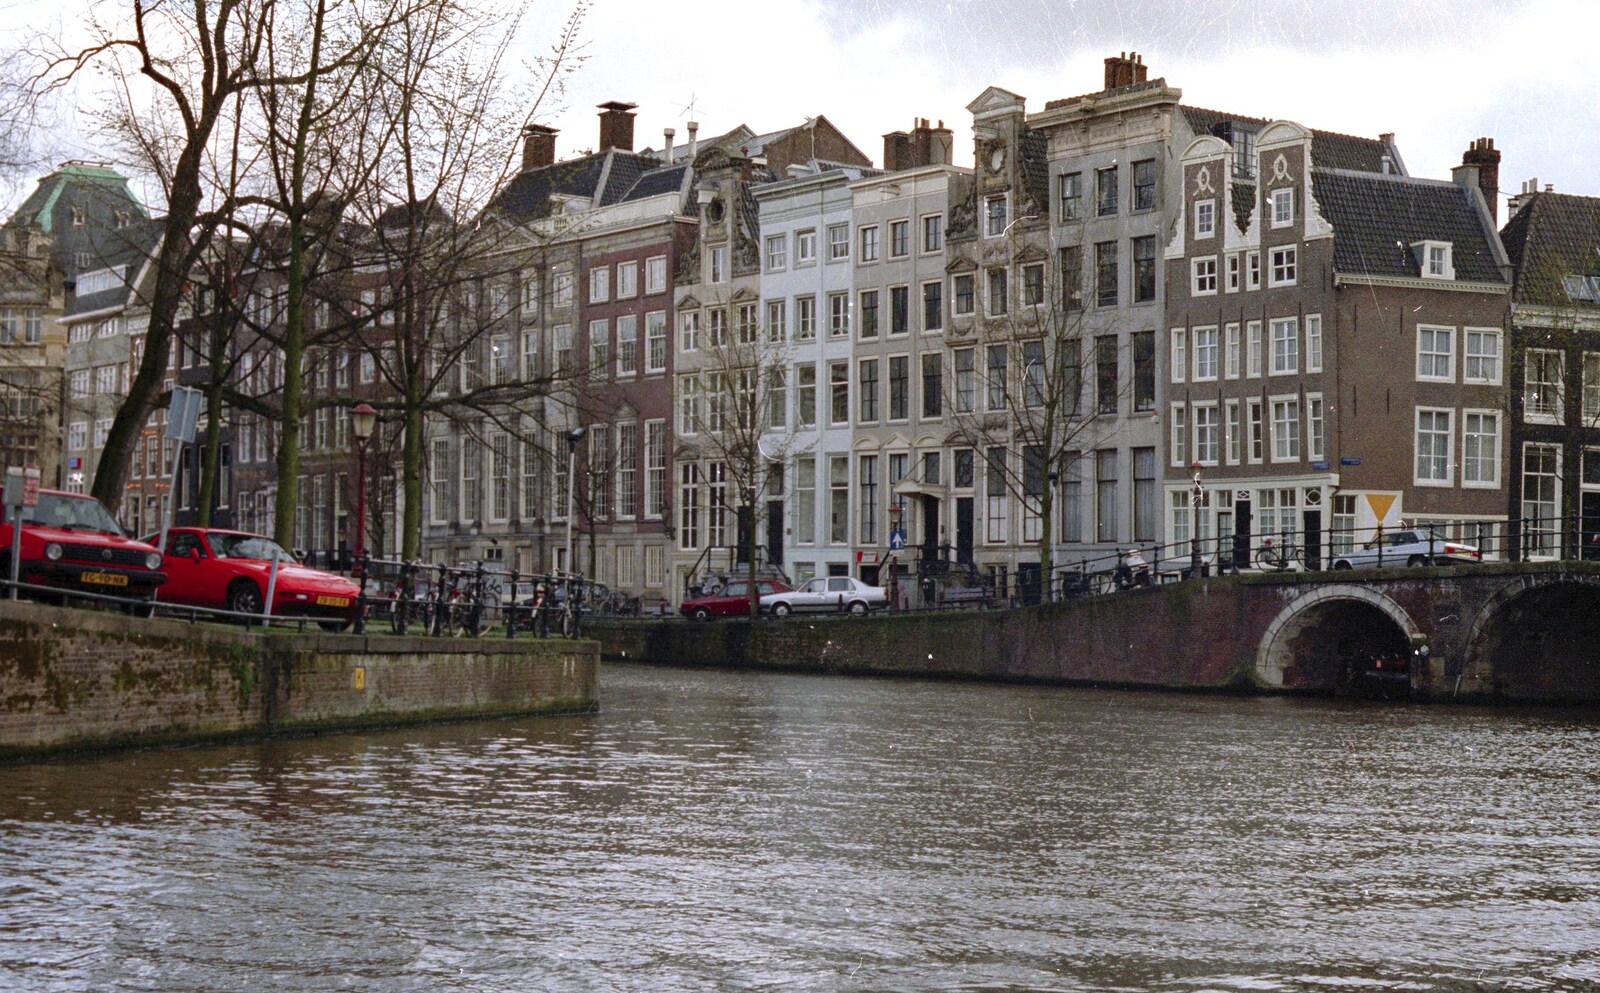 Out and About in Amsterdam, Hoorne, Vollendam and Edam, The Netherlands - 26th March 1992: Amsterdam canal